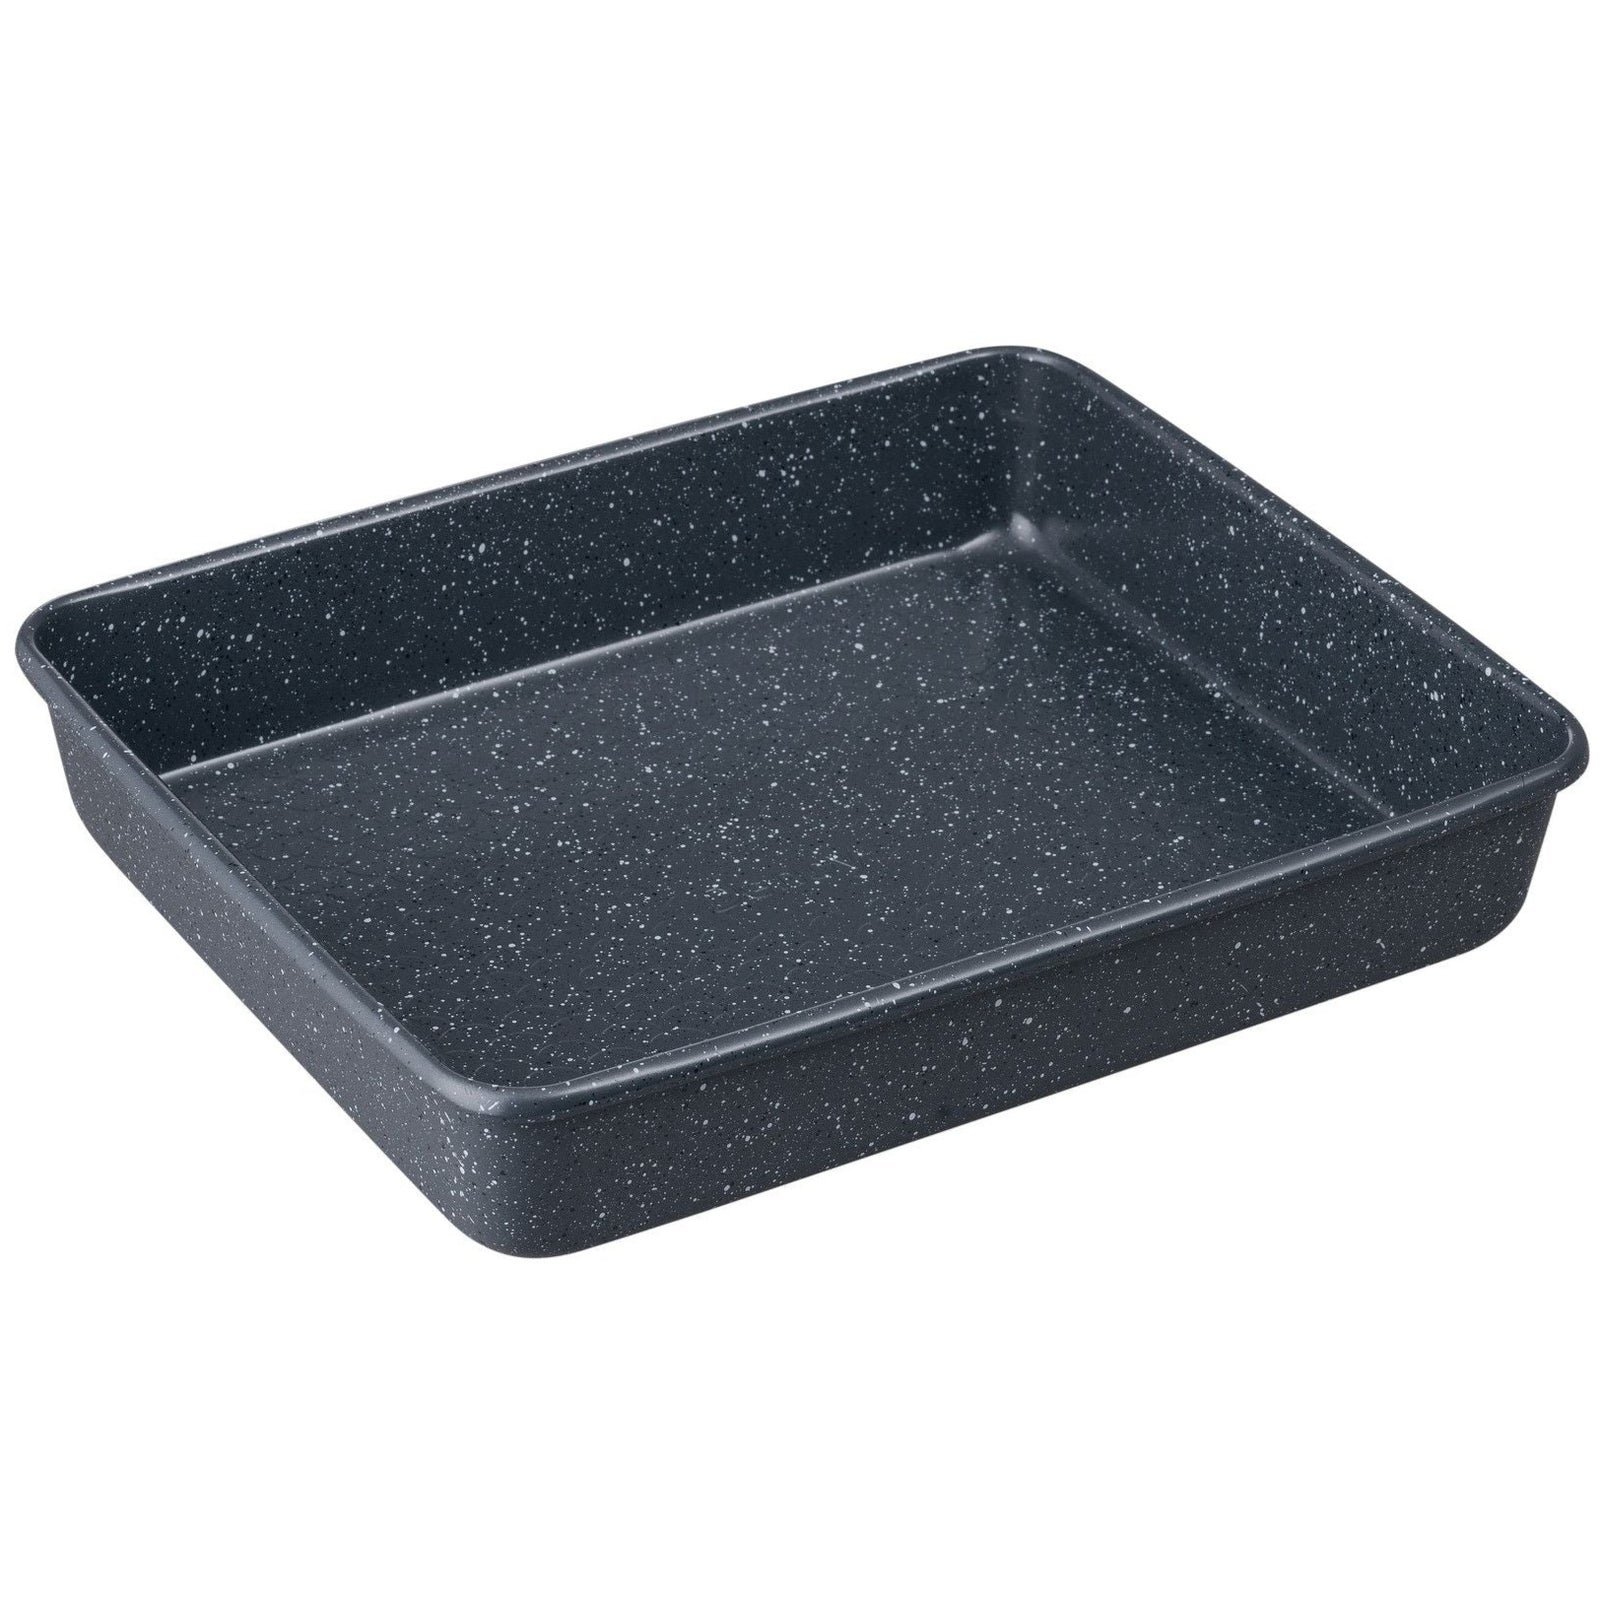 Non Stick Baking Tins by Scoville - Bread Tins, Cake Tins